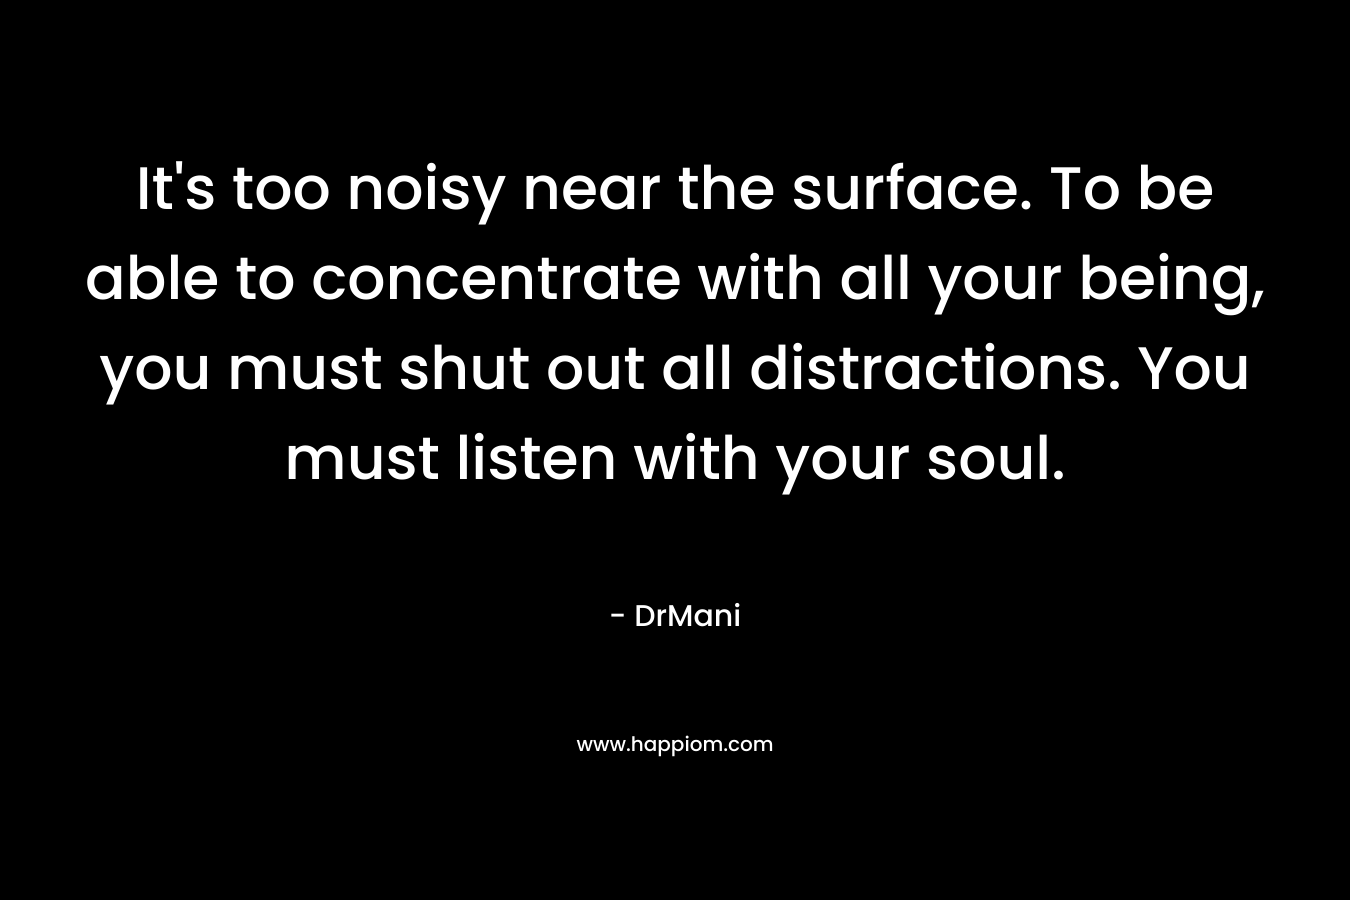 It's too noisy near the surface. To be able to concentrate with all your being, you must shut out all distractions. You must listen with your soul.